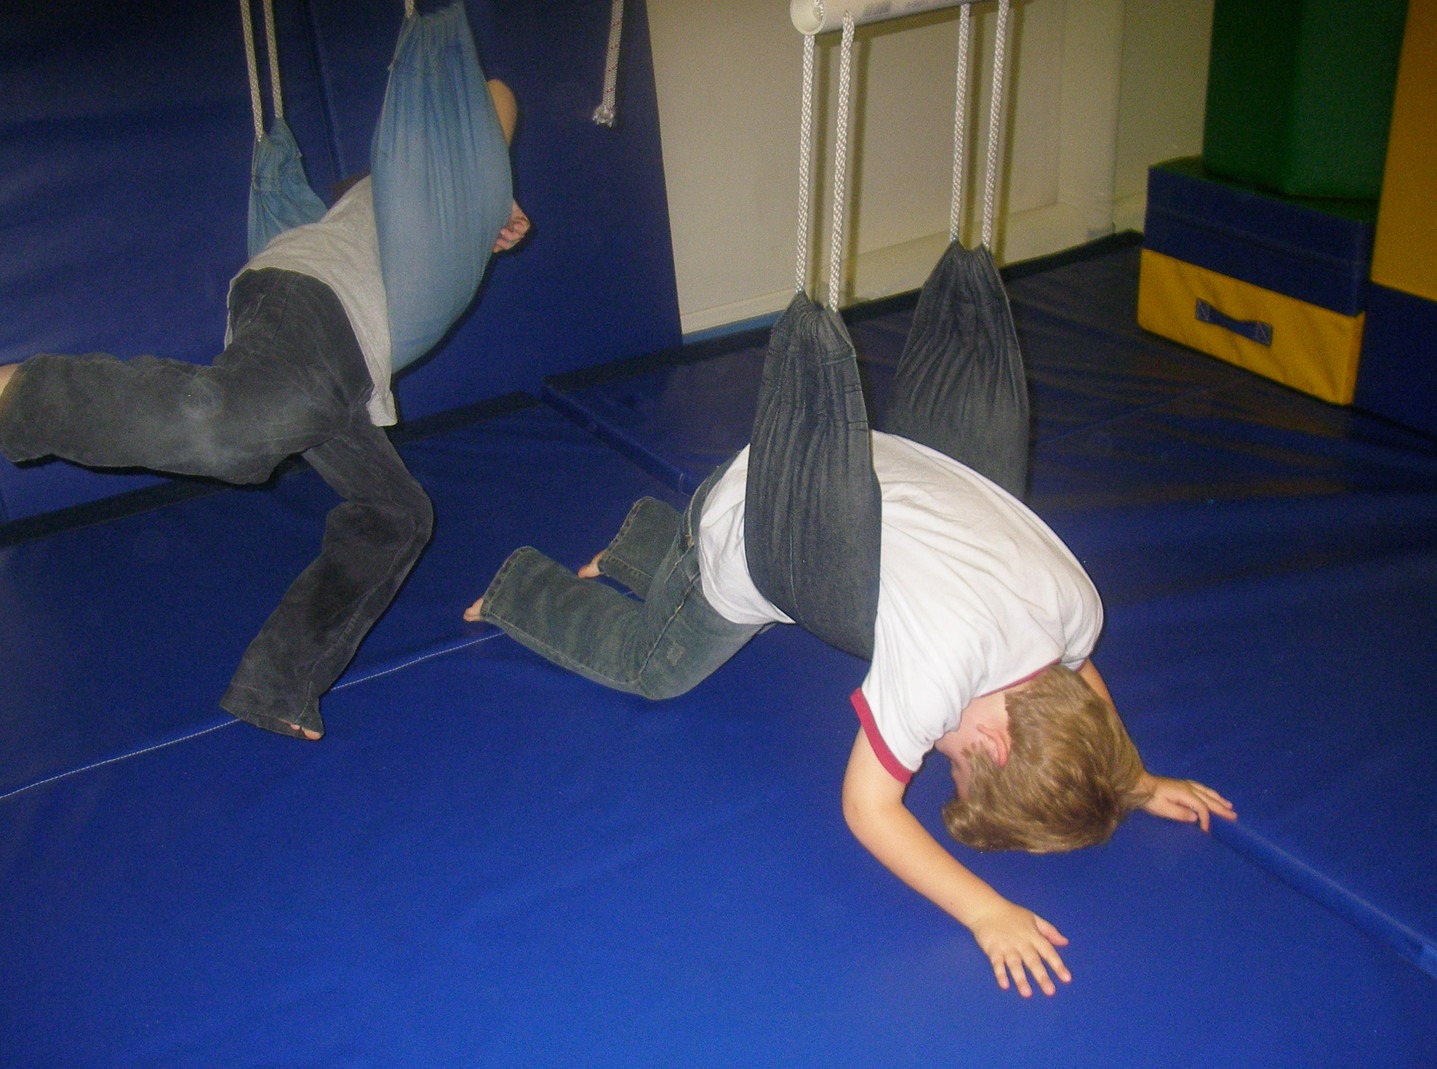 Two children are playing on a blue mat.